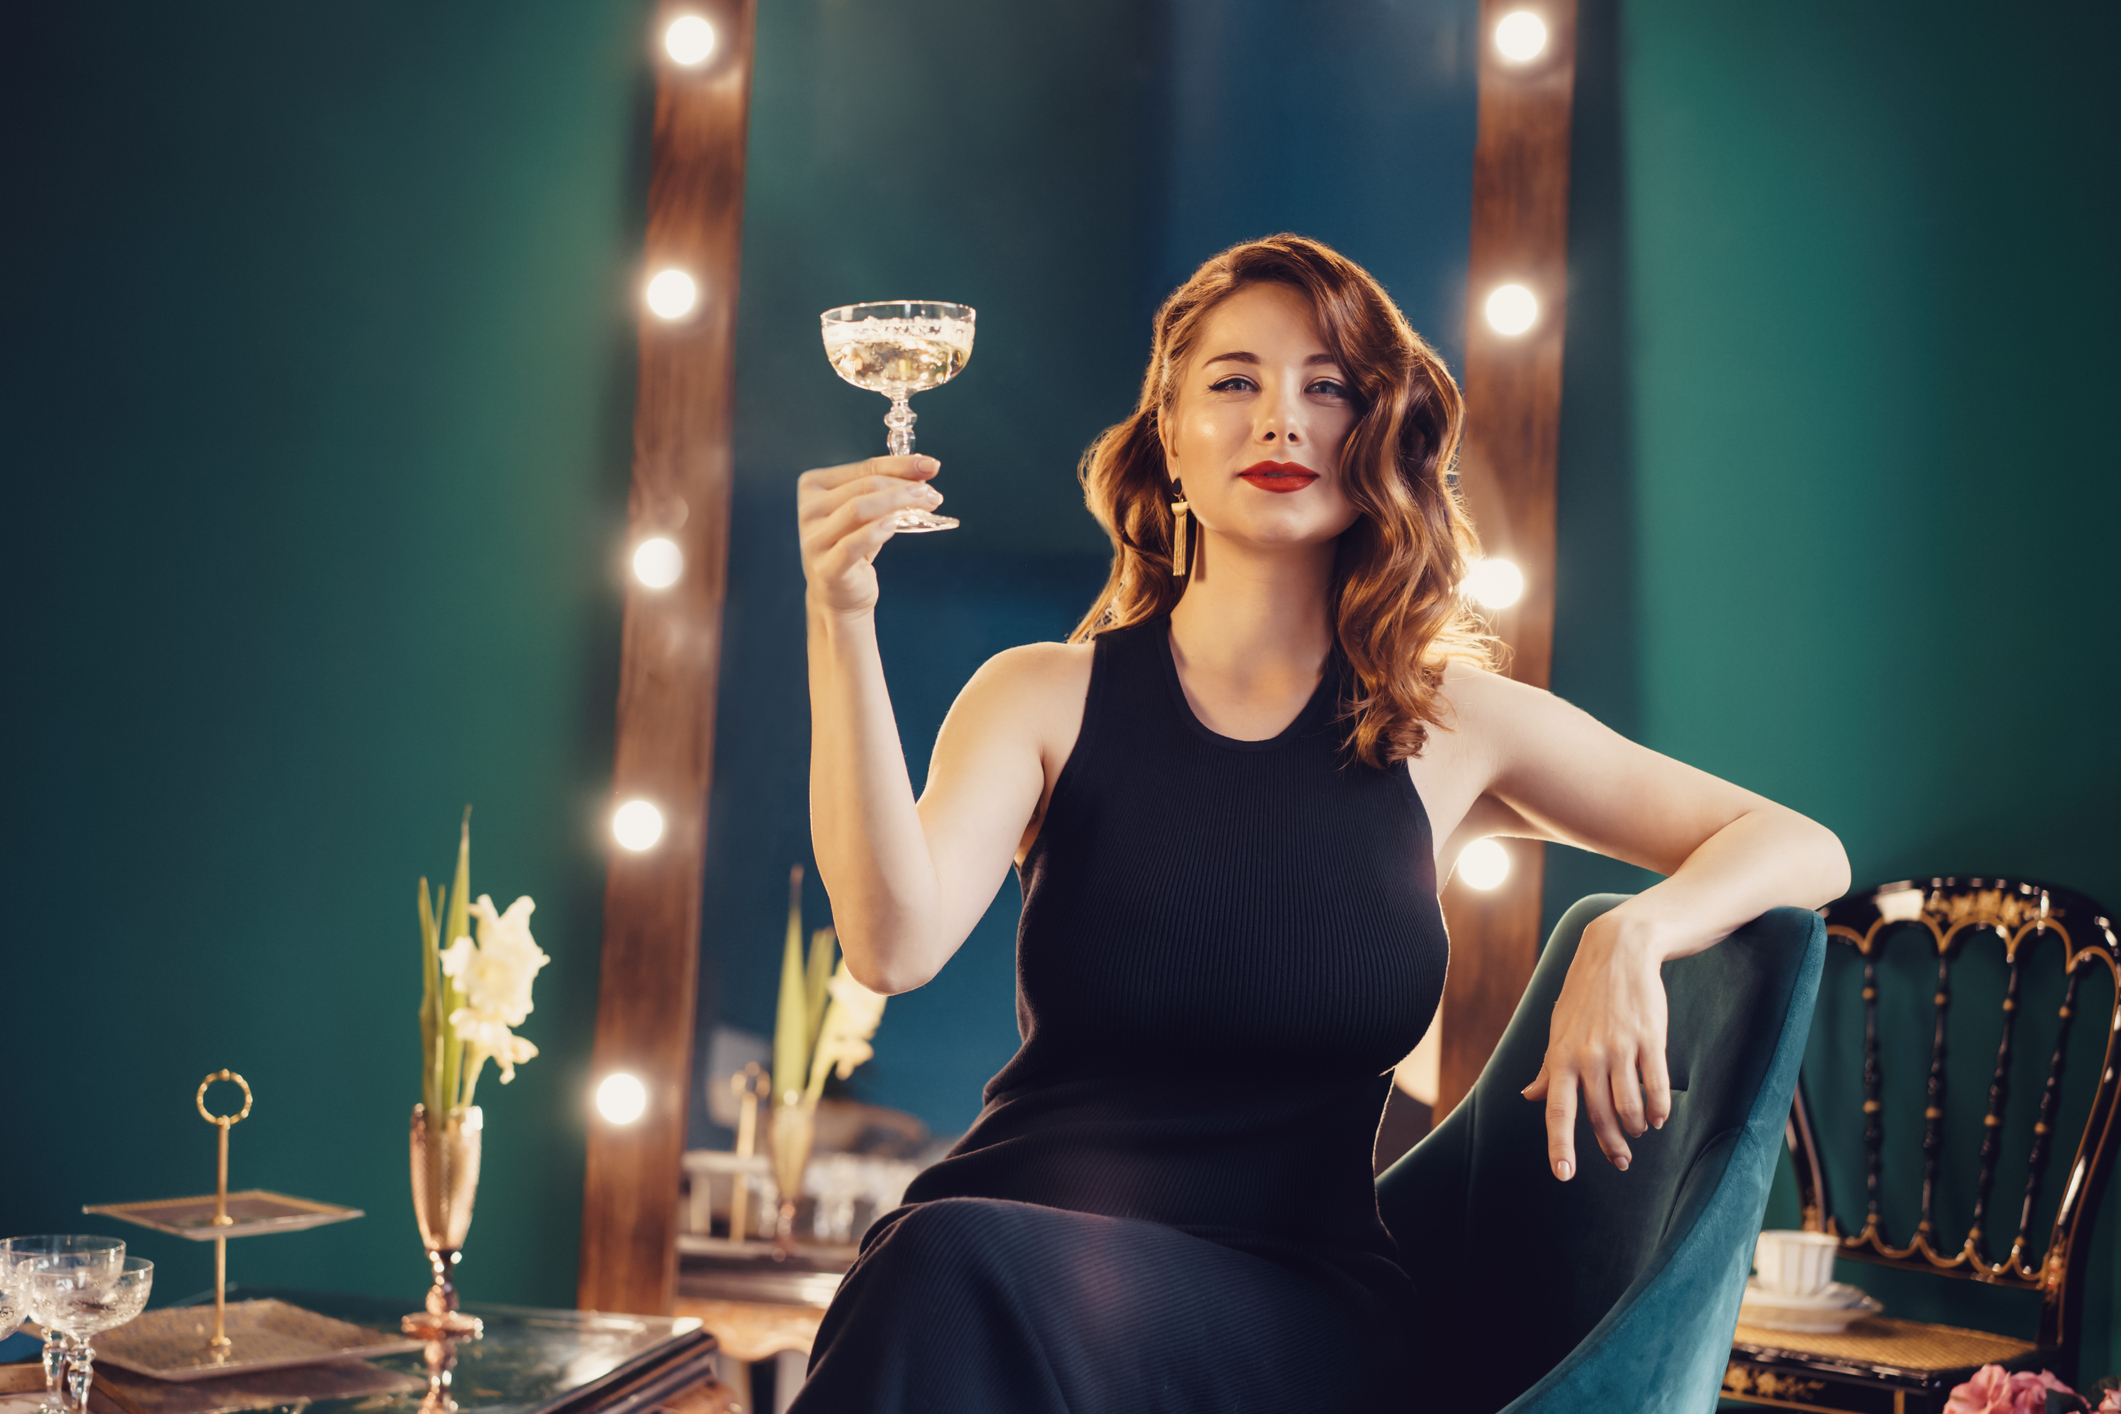 Posh elegant woman in evening dress with a glass of champagne in the luxury dressing room interior. Celebrity, superstar lifestyle. Party, drinks, holidays and celebration concept. Selective focus.